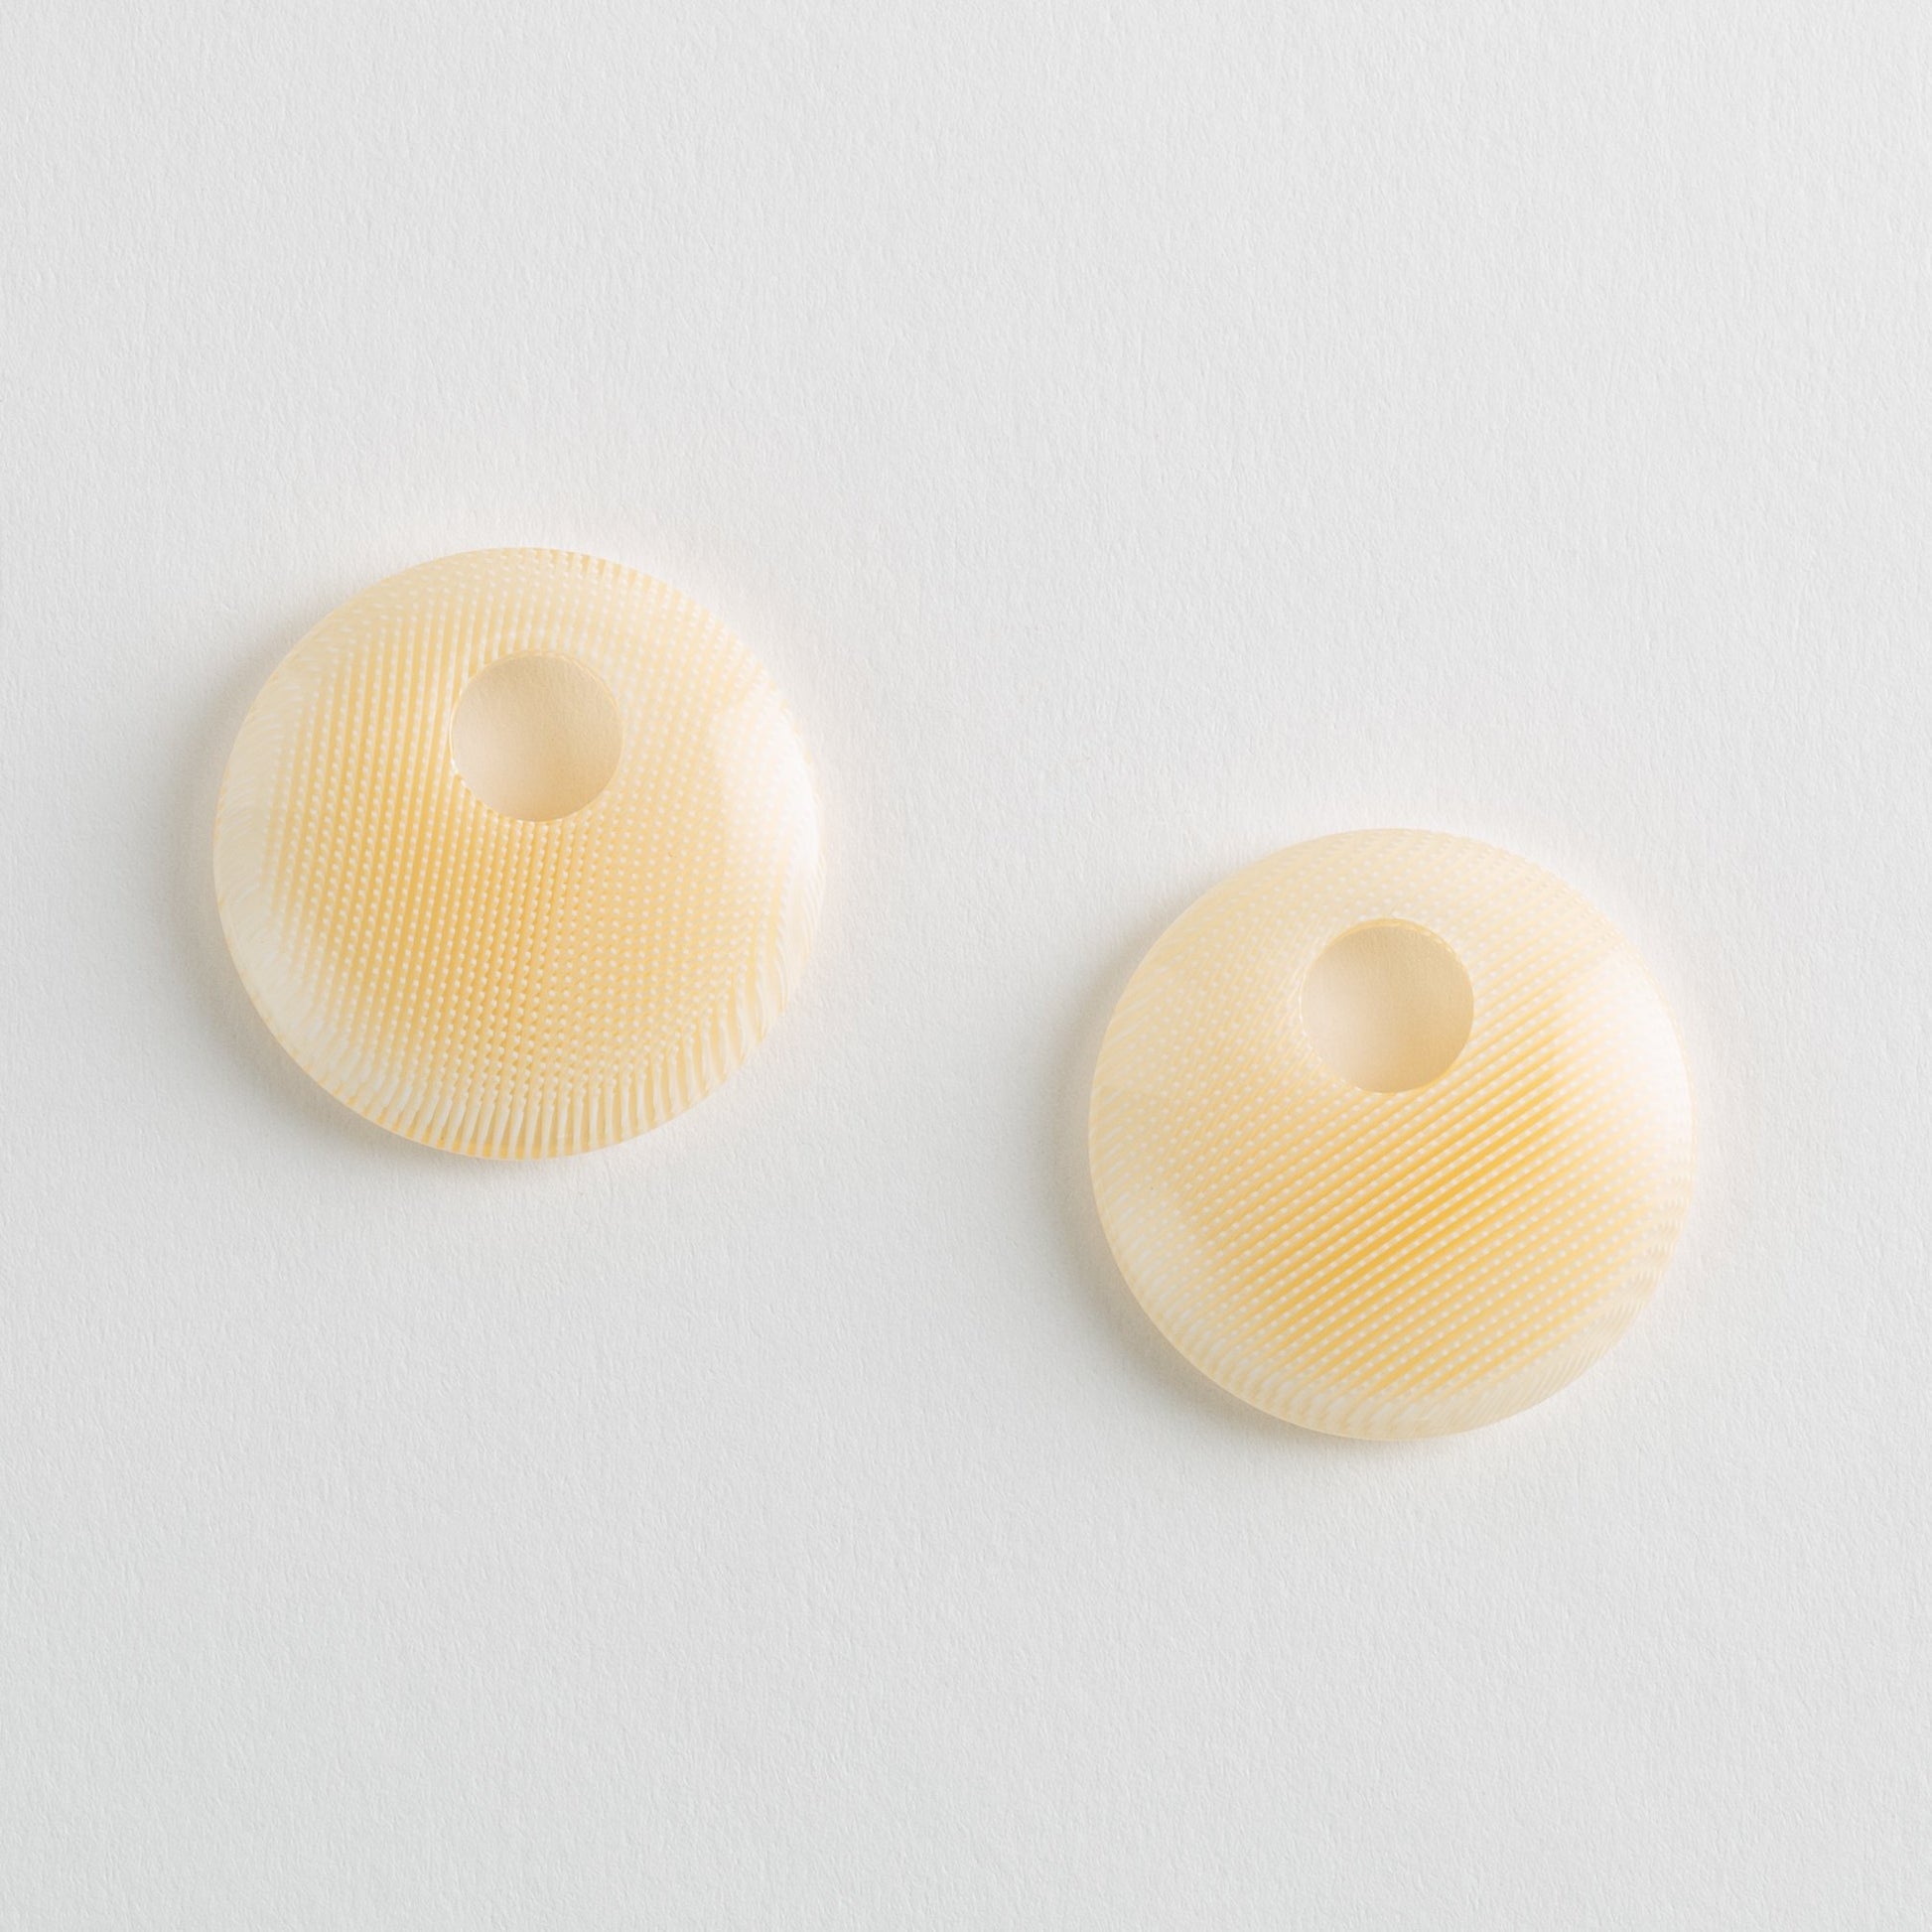 Disc Earring Charms in Cream Dot